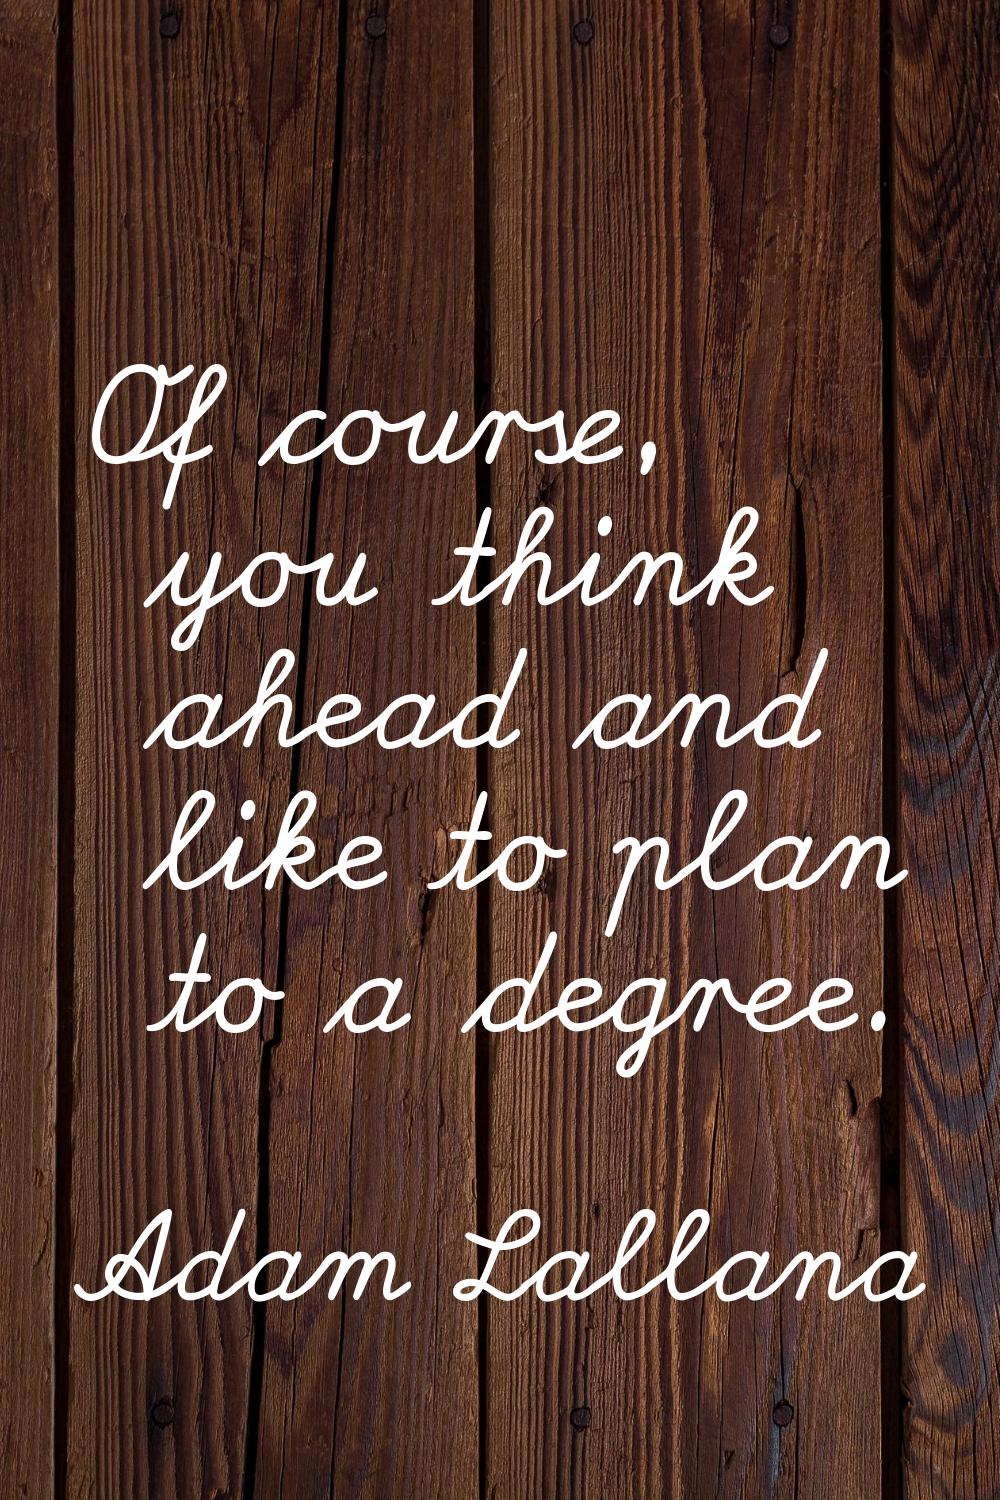 Of course, you think ahead and like to plan to a degree.